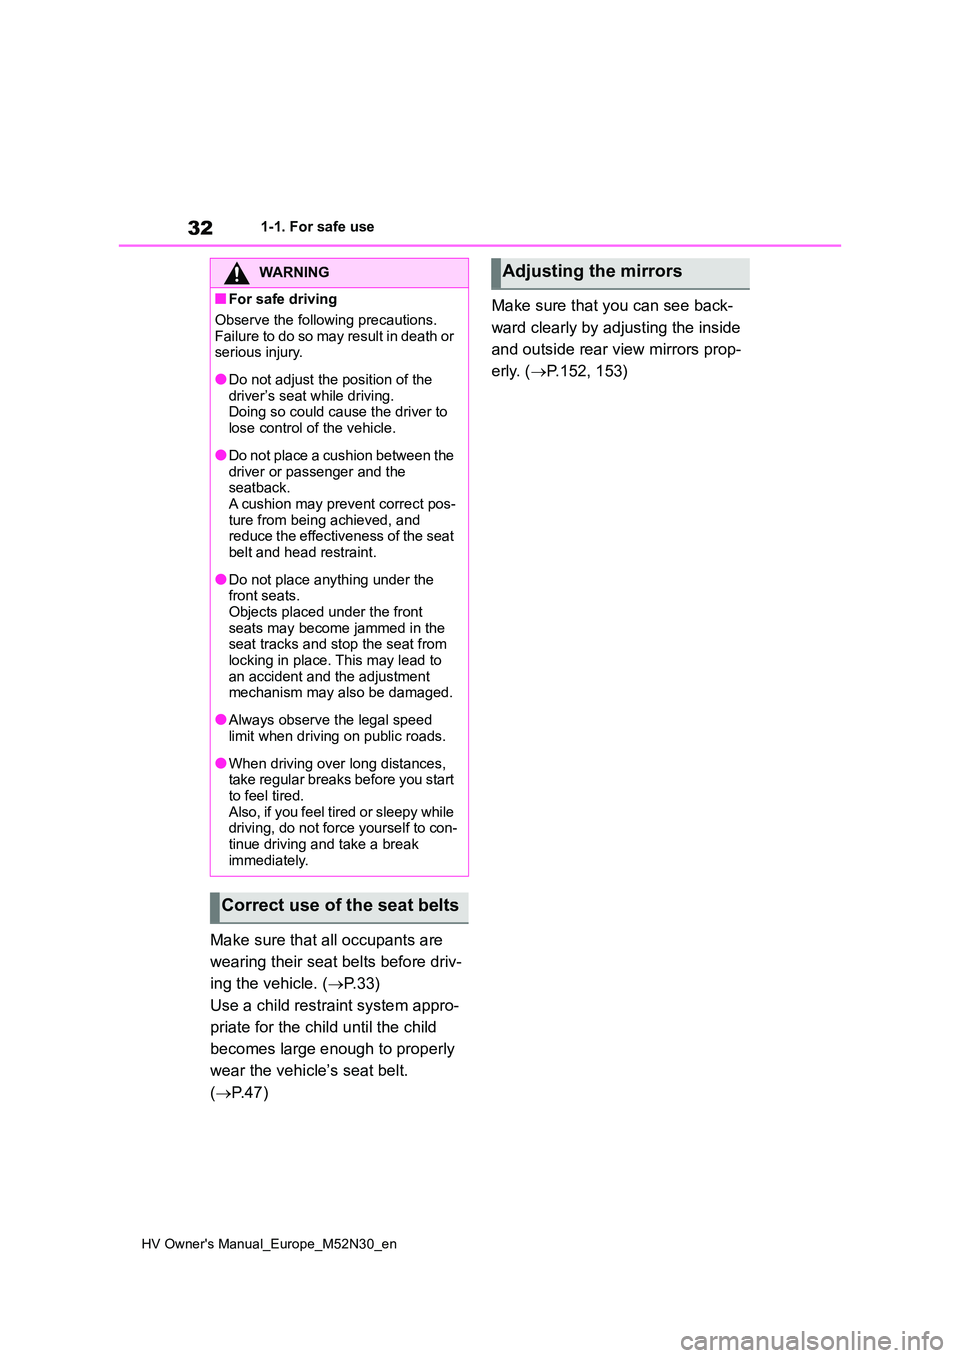 TOYOTA YARIS 2022  Owners Manual 32
HV Owner's Manual_Europe_M52N30_en
1-1. For safe use
Make sure that all occupants are  
wearing their seat belts before driv- 
ing the vehicle. ( P.33) 
Use a child restraint system appro- 
